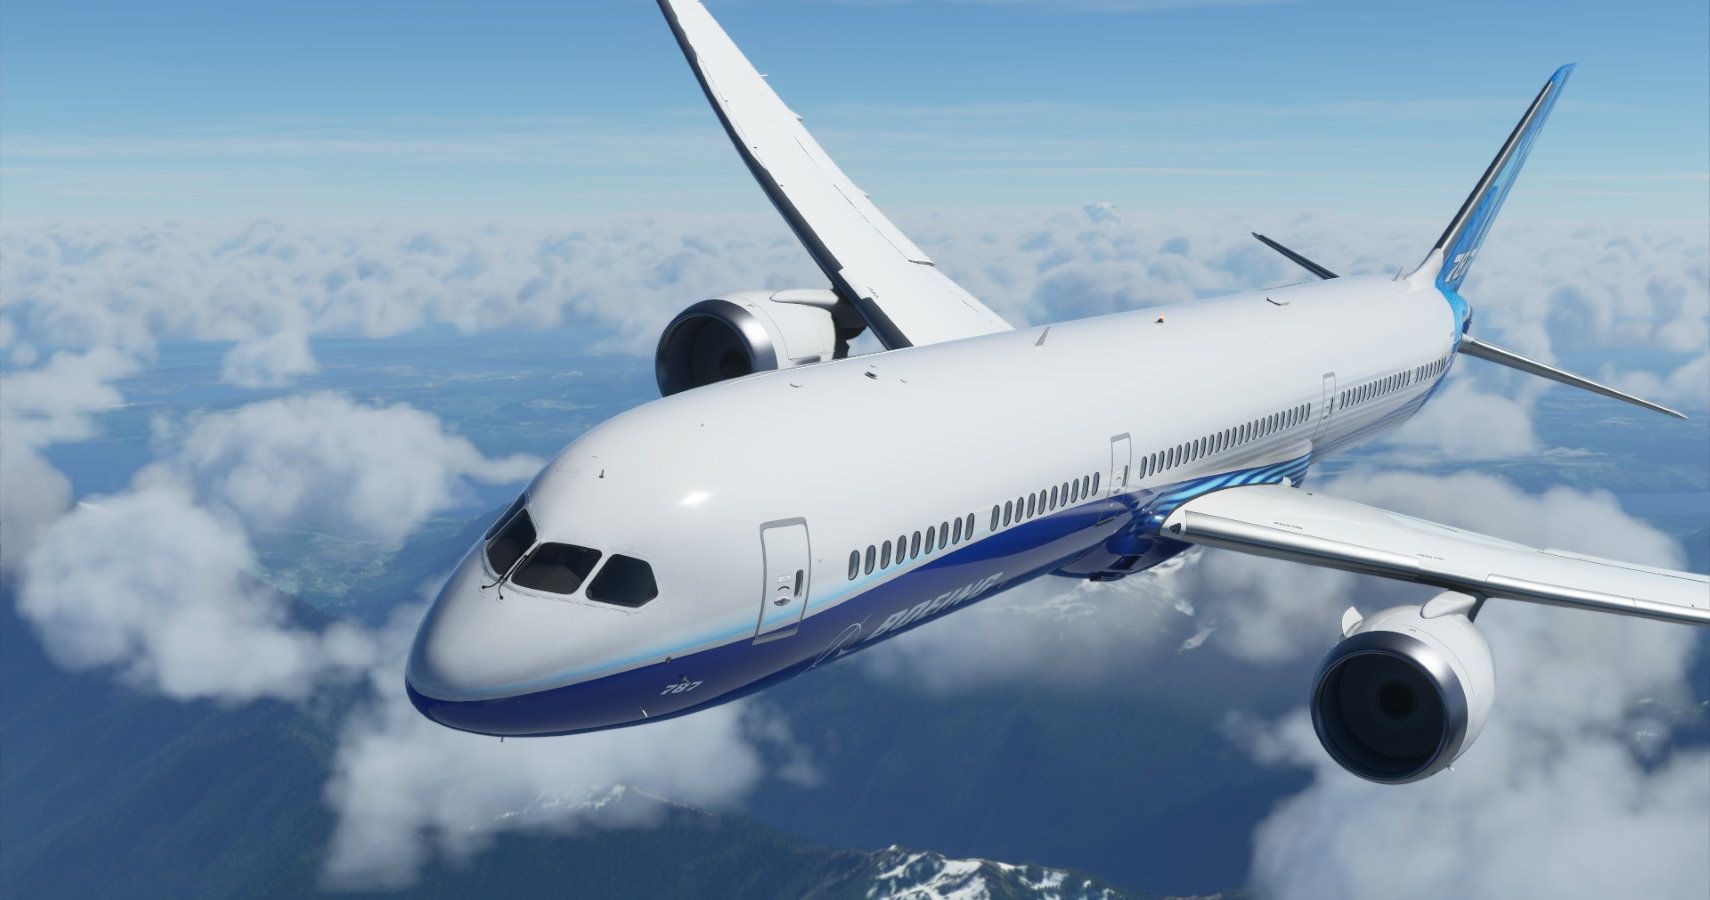 Microsoft Flight Simulator 2020 Isnt Approved For Sale In China—Heres Why